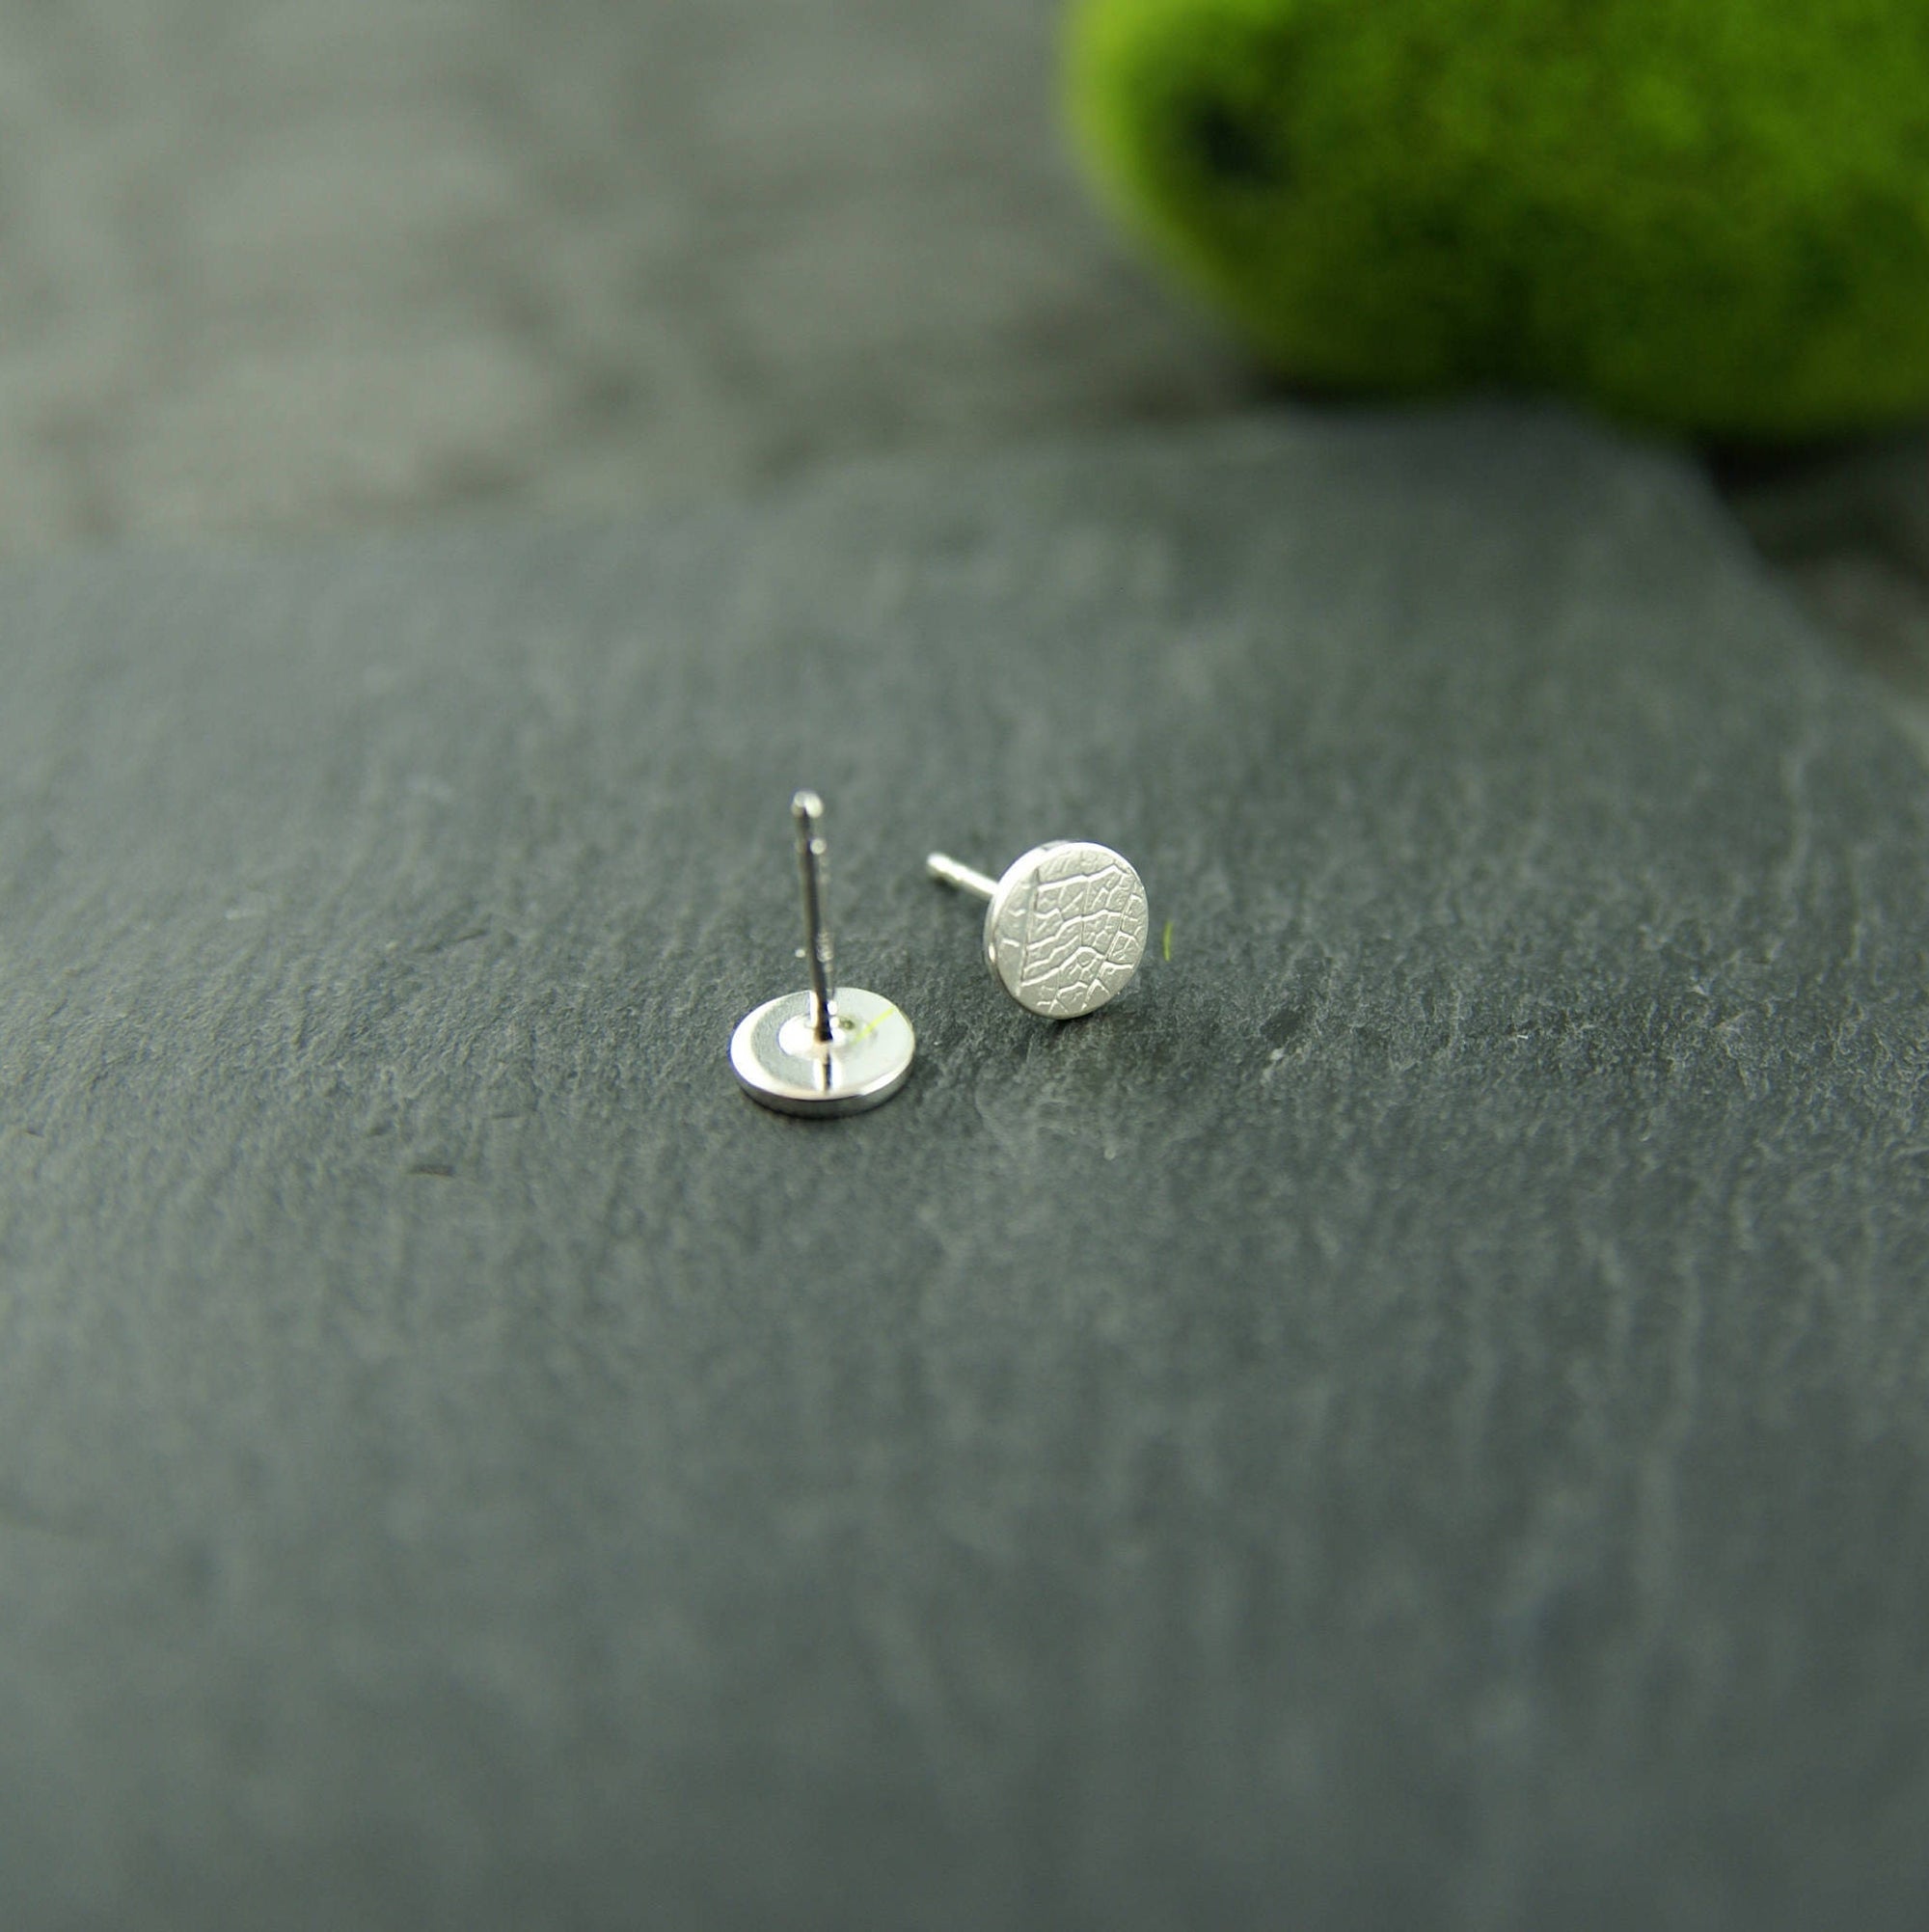 Small round earrings in sterling silver